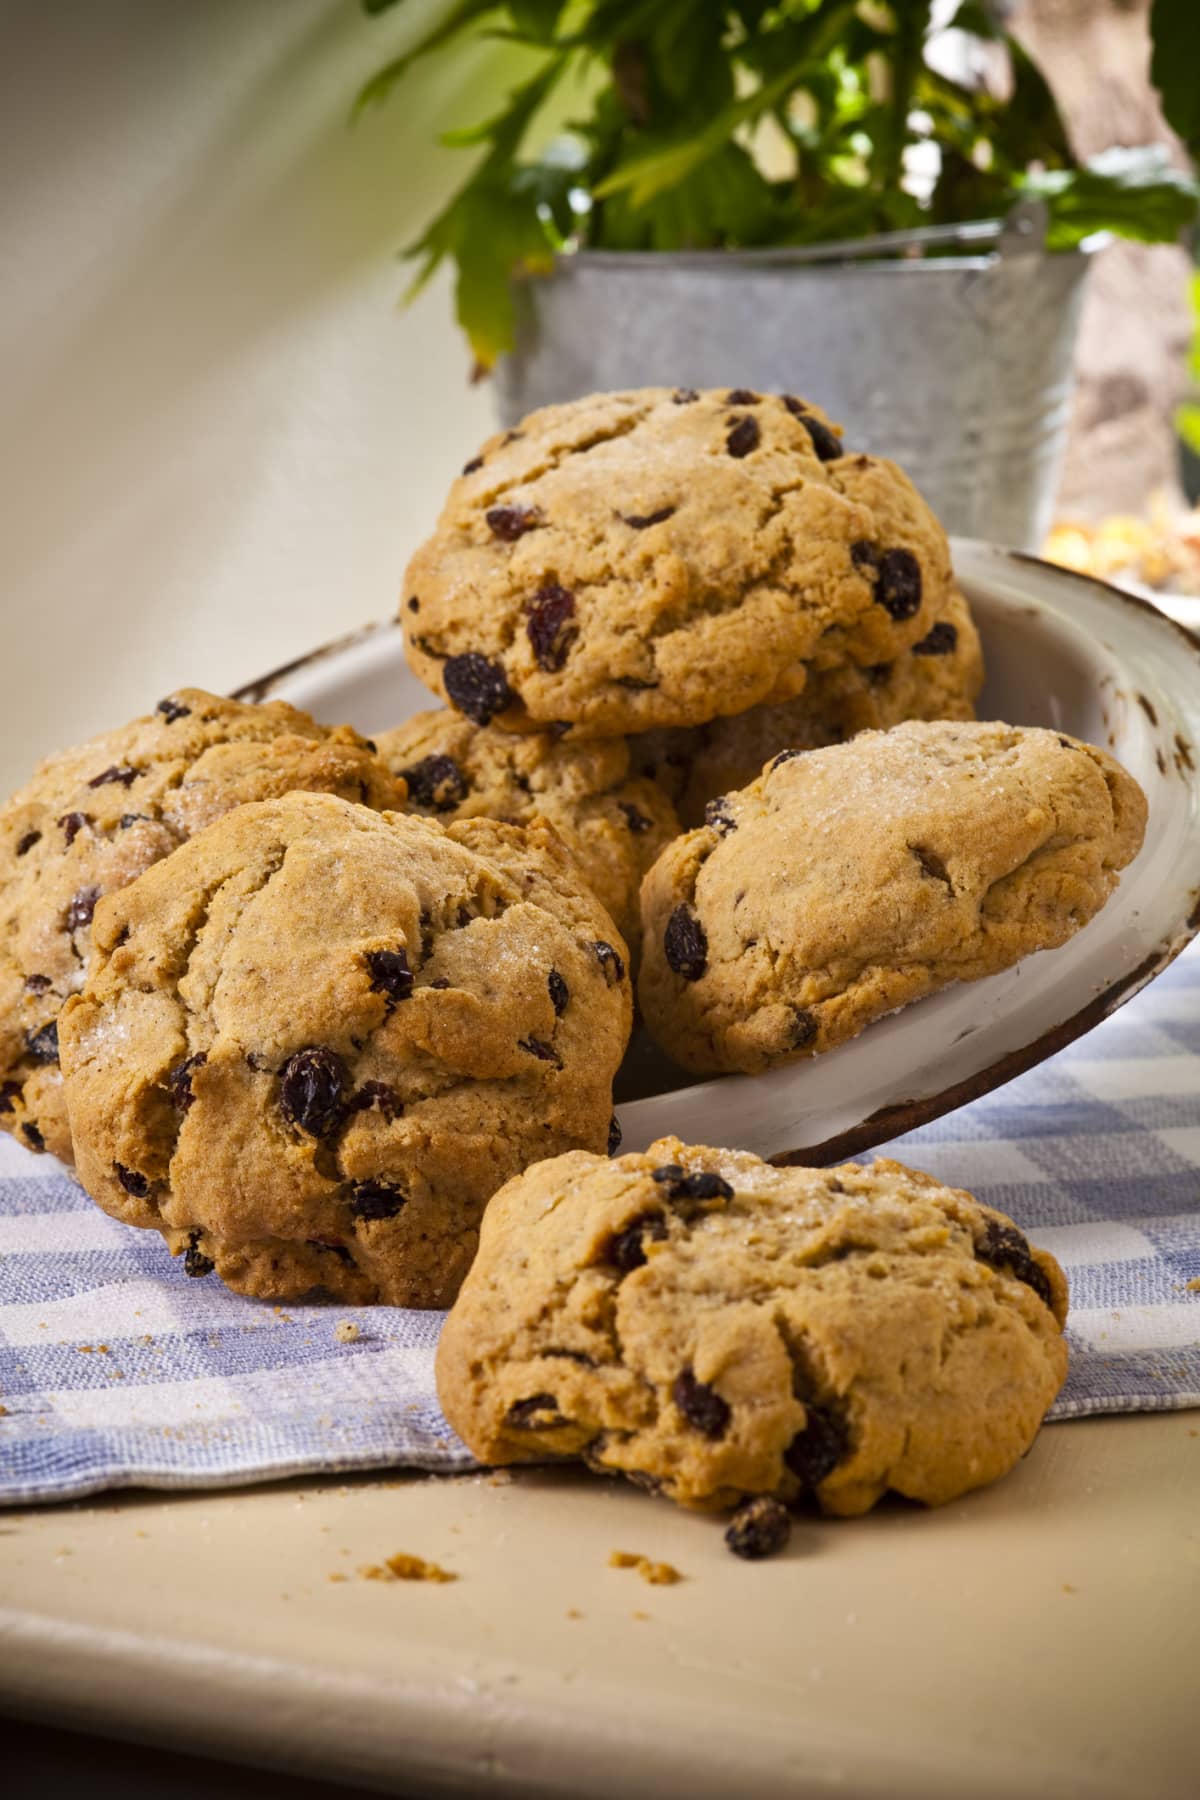 Rustic homemade rock cakes in a rustic home kitchen setting, Newport, Wales, 2010